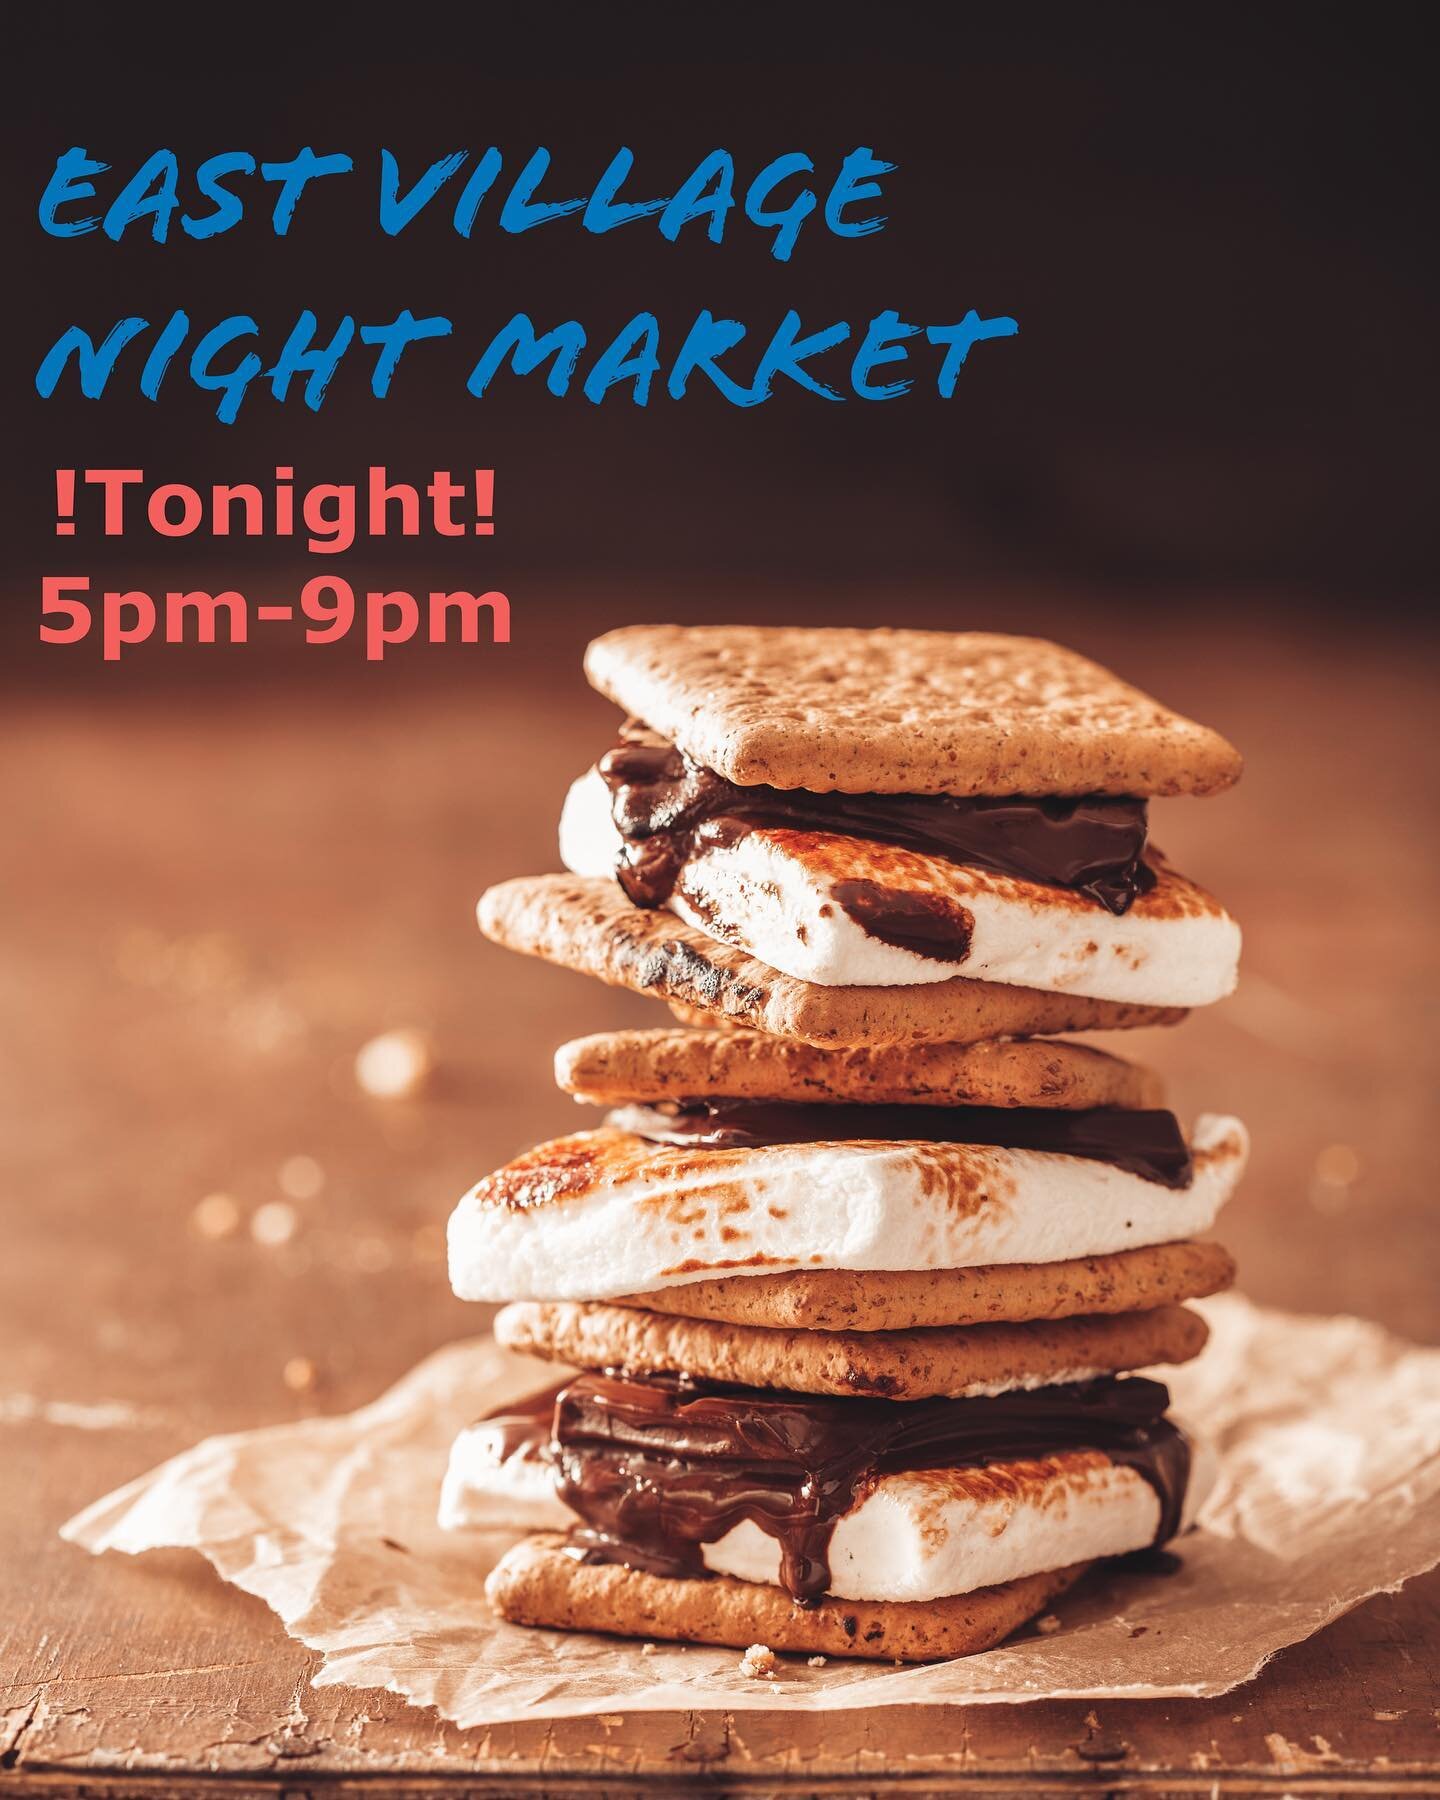 Come see us, San Diego!!
We will be at the @eastvillagesd Night Market this evening from 5pm-9pm, serving fresh made-to-order s&rsquo;mores!
.
.
.
.
#organic #glutenfree #plantbased #sandiego #eastvillage #eastvillagesd #nightmarket #california #soca